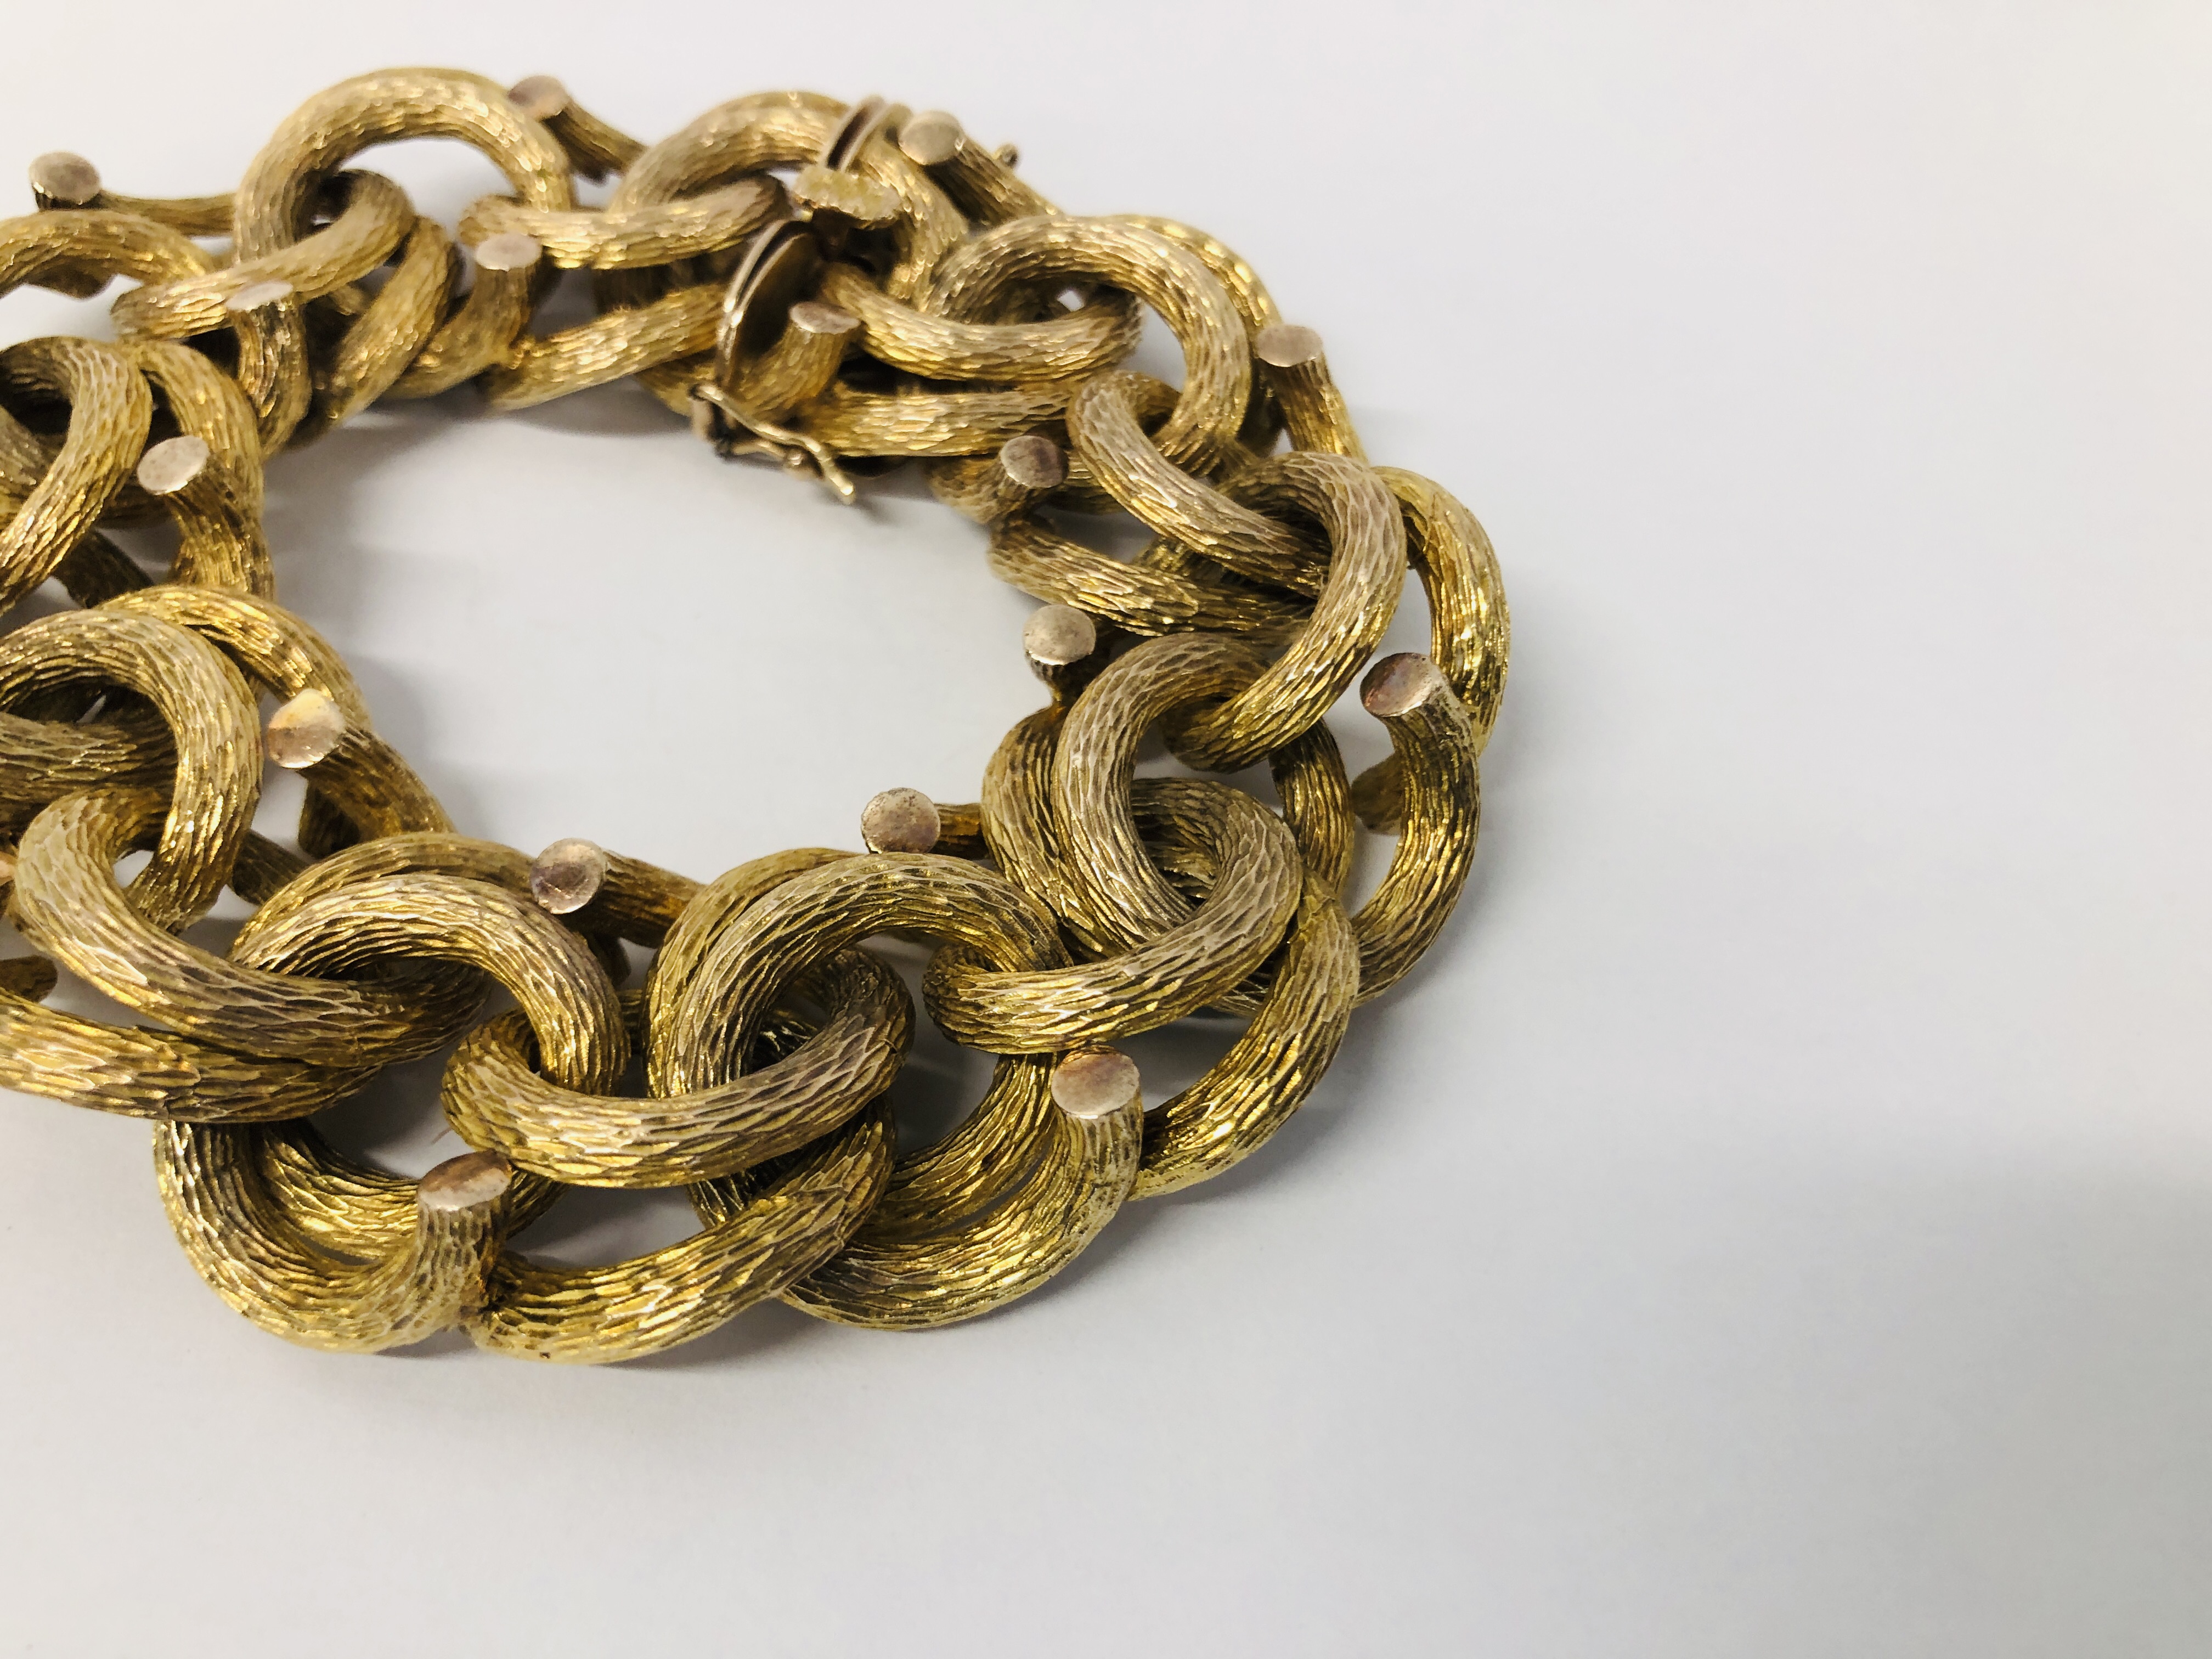 AN IMPRESSIVE 9CT. GOLD HEAVY BRACELET OF INTERWOVEN DESIGN, WITH SAFETY CHAIN. - Image 5 of 11